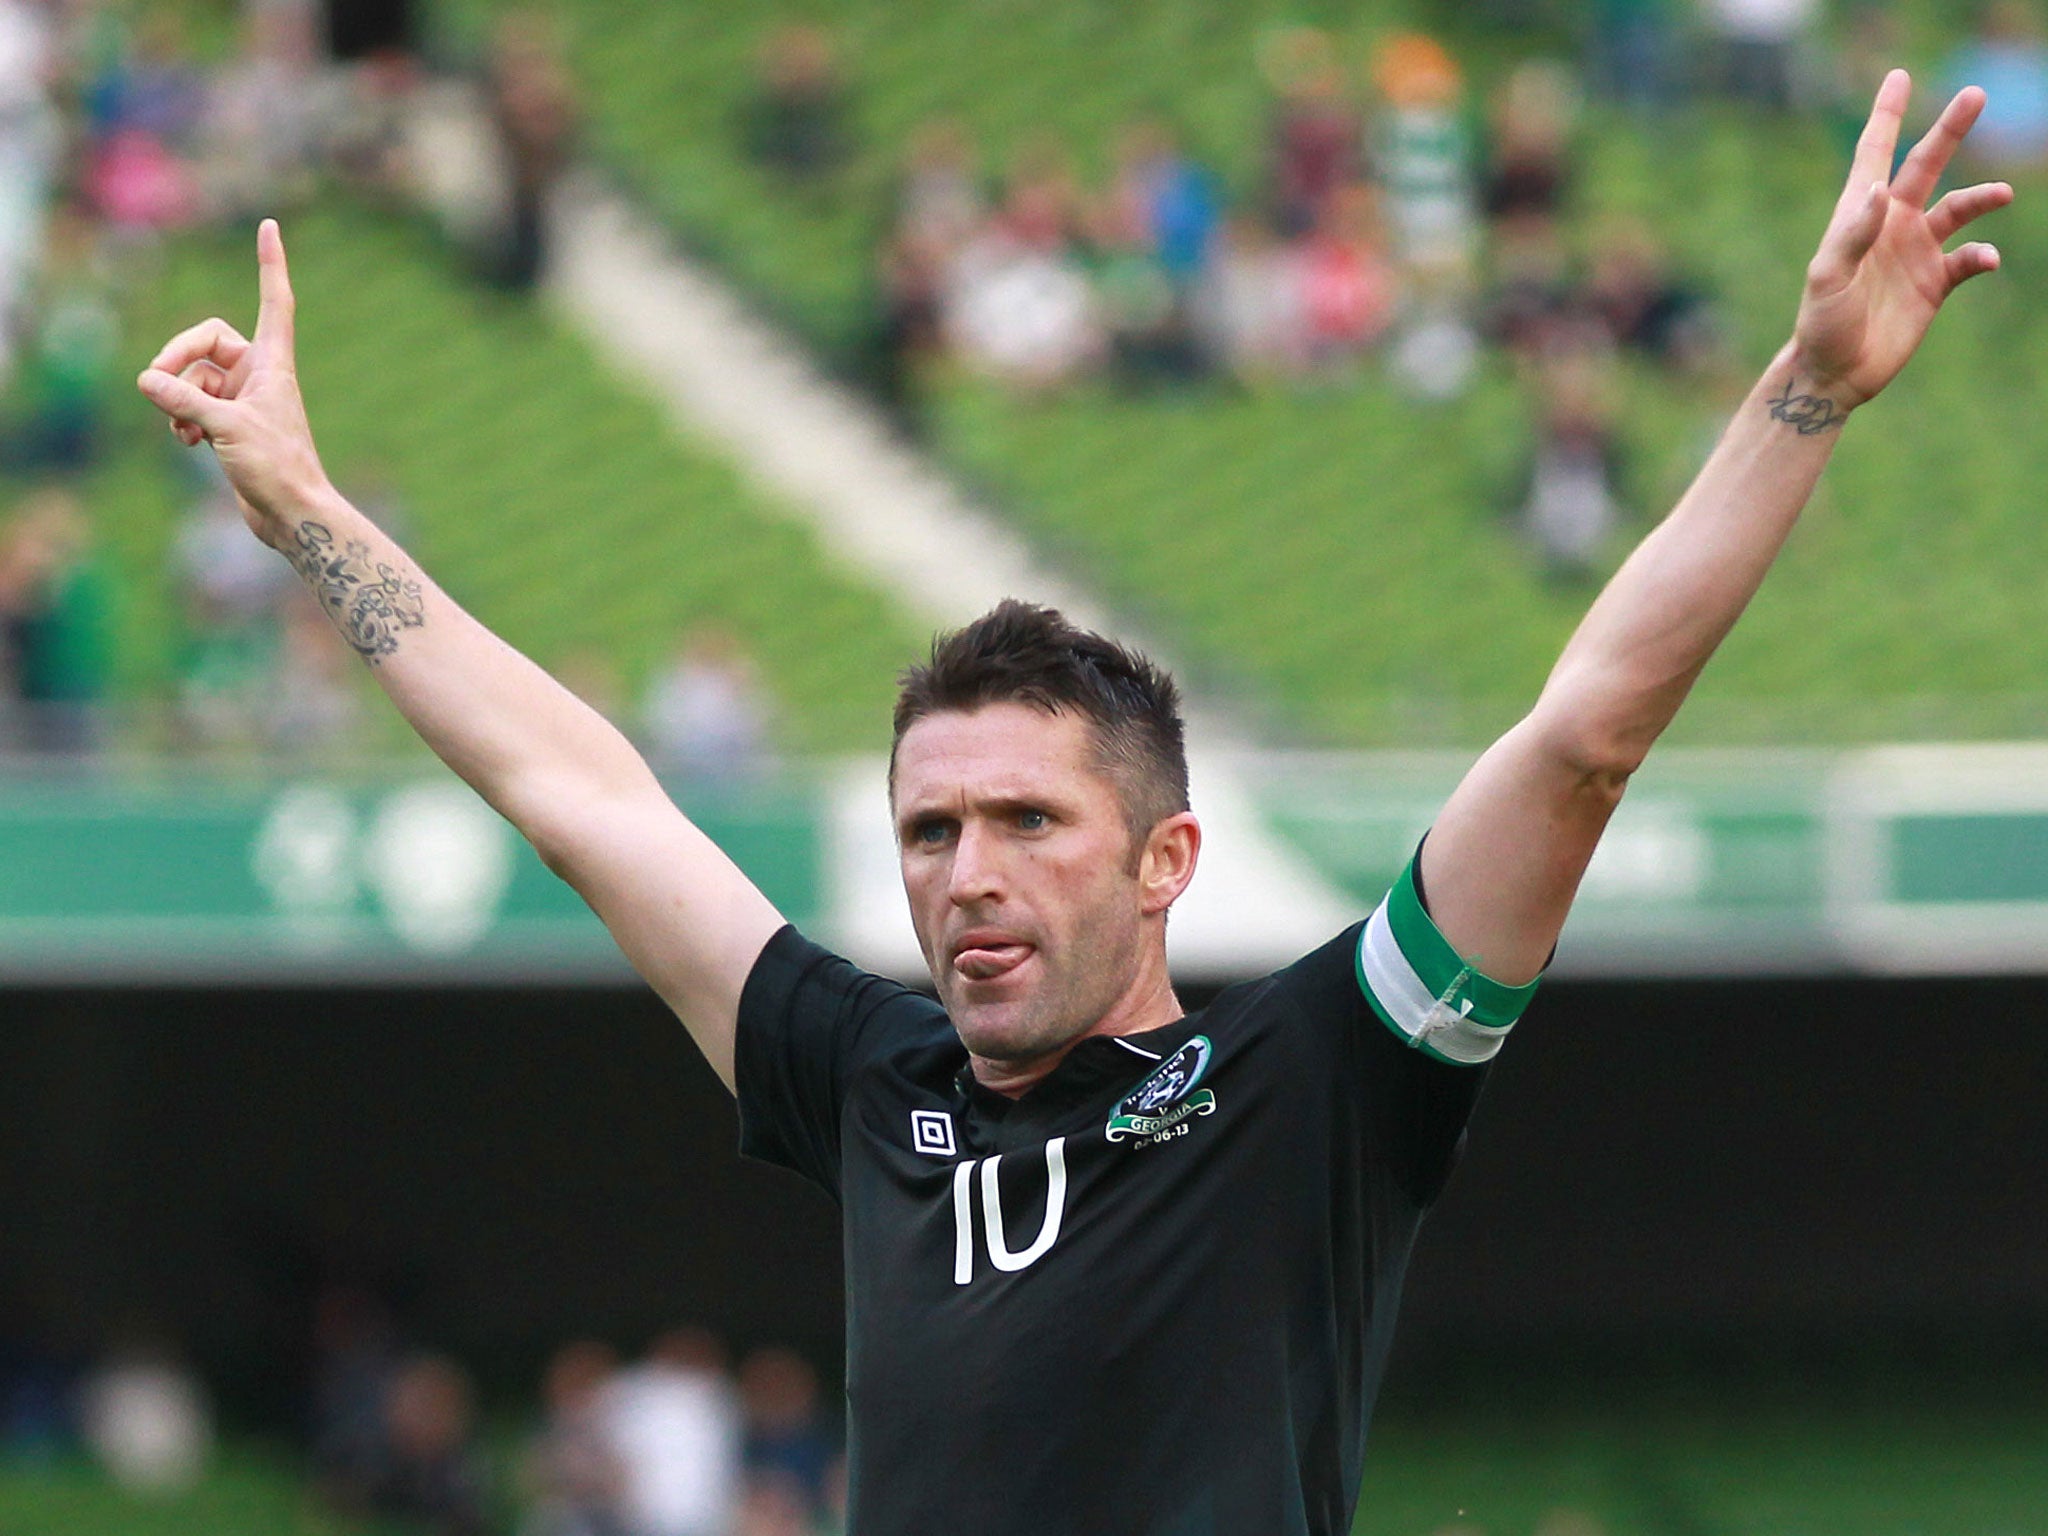 Robbie Keane celebrated equalling Shay Given's record caps haul with his 55th and 56th goals